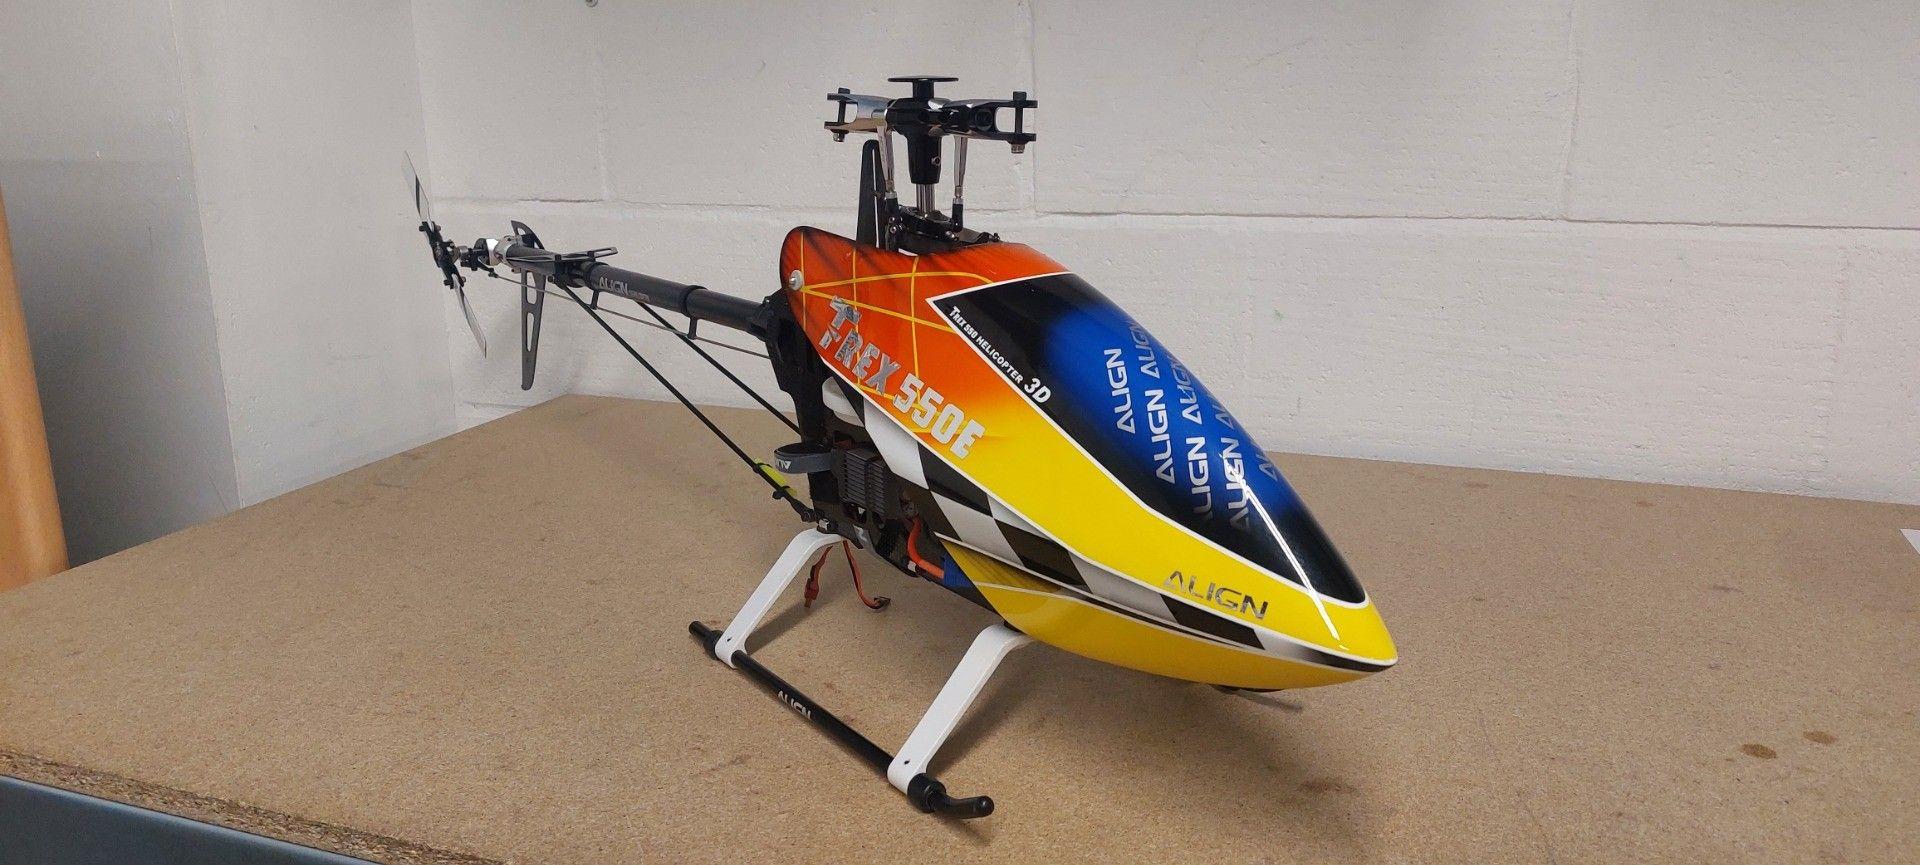 Align 550 Helicopter: Where to Buy: Top Retailers for the Align 550 Helicopter